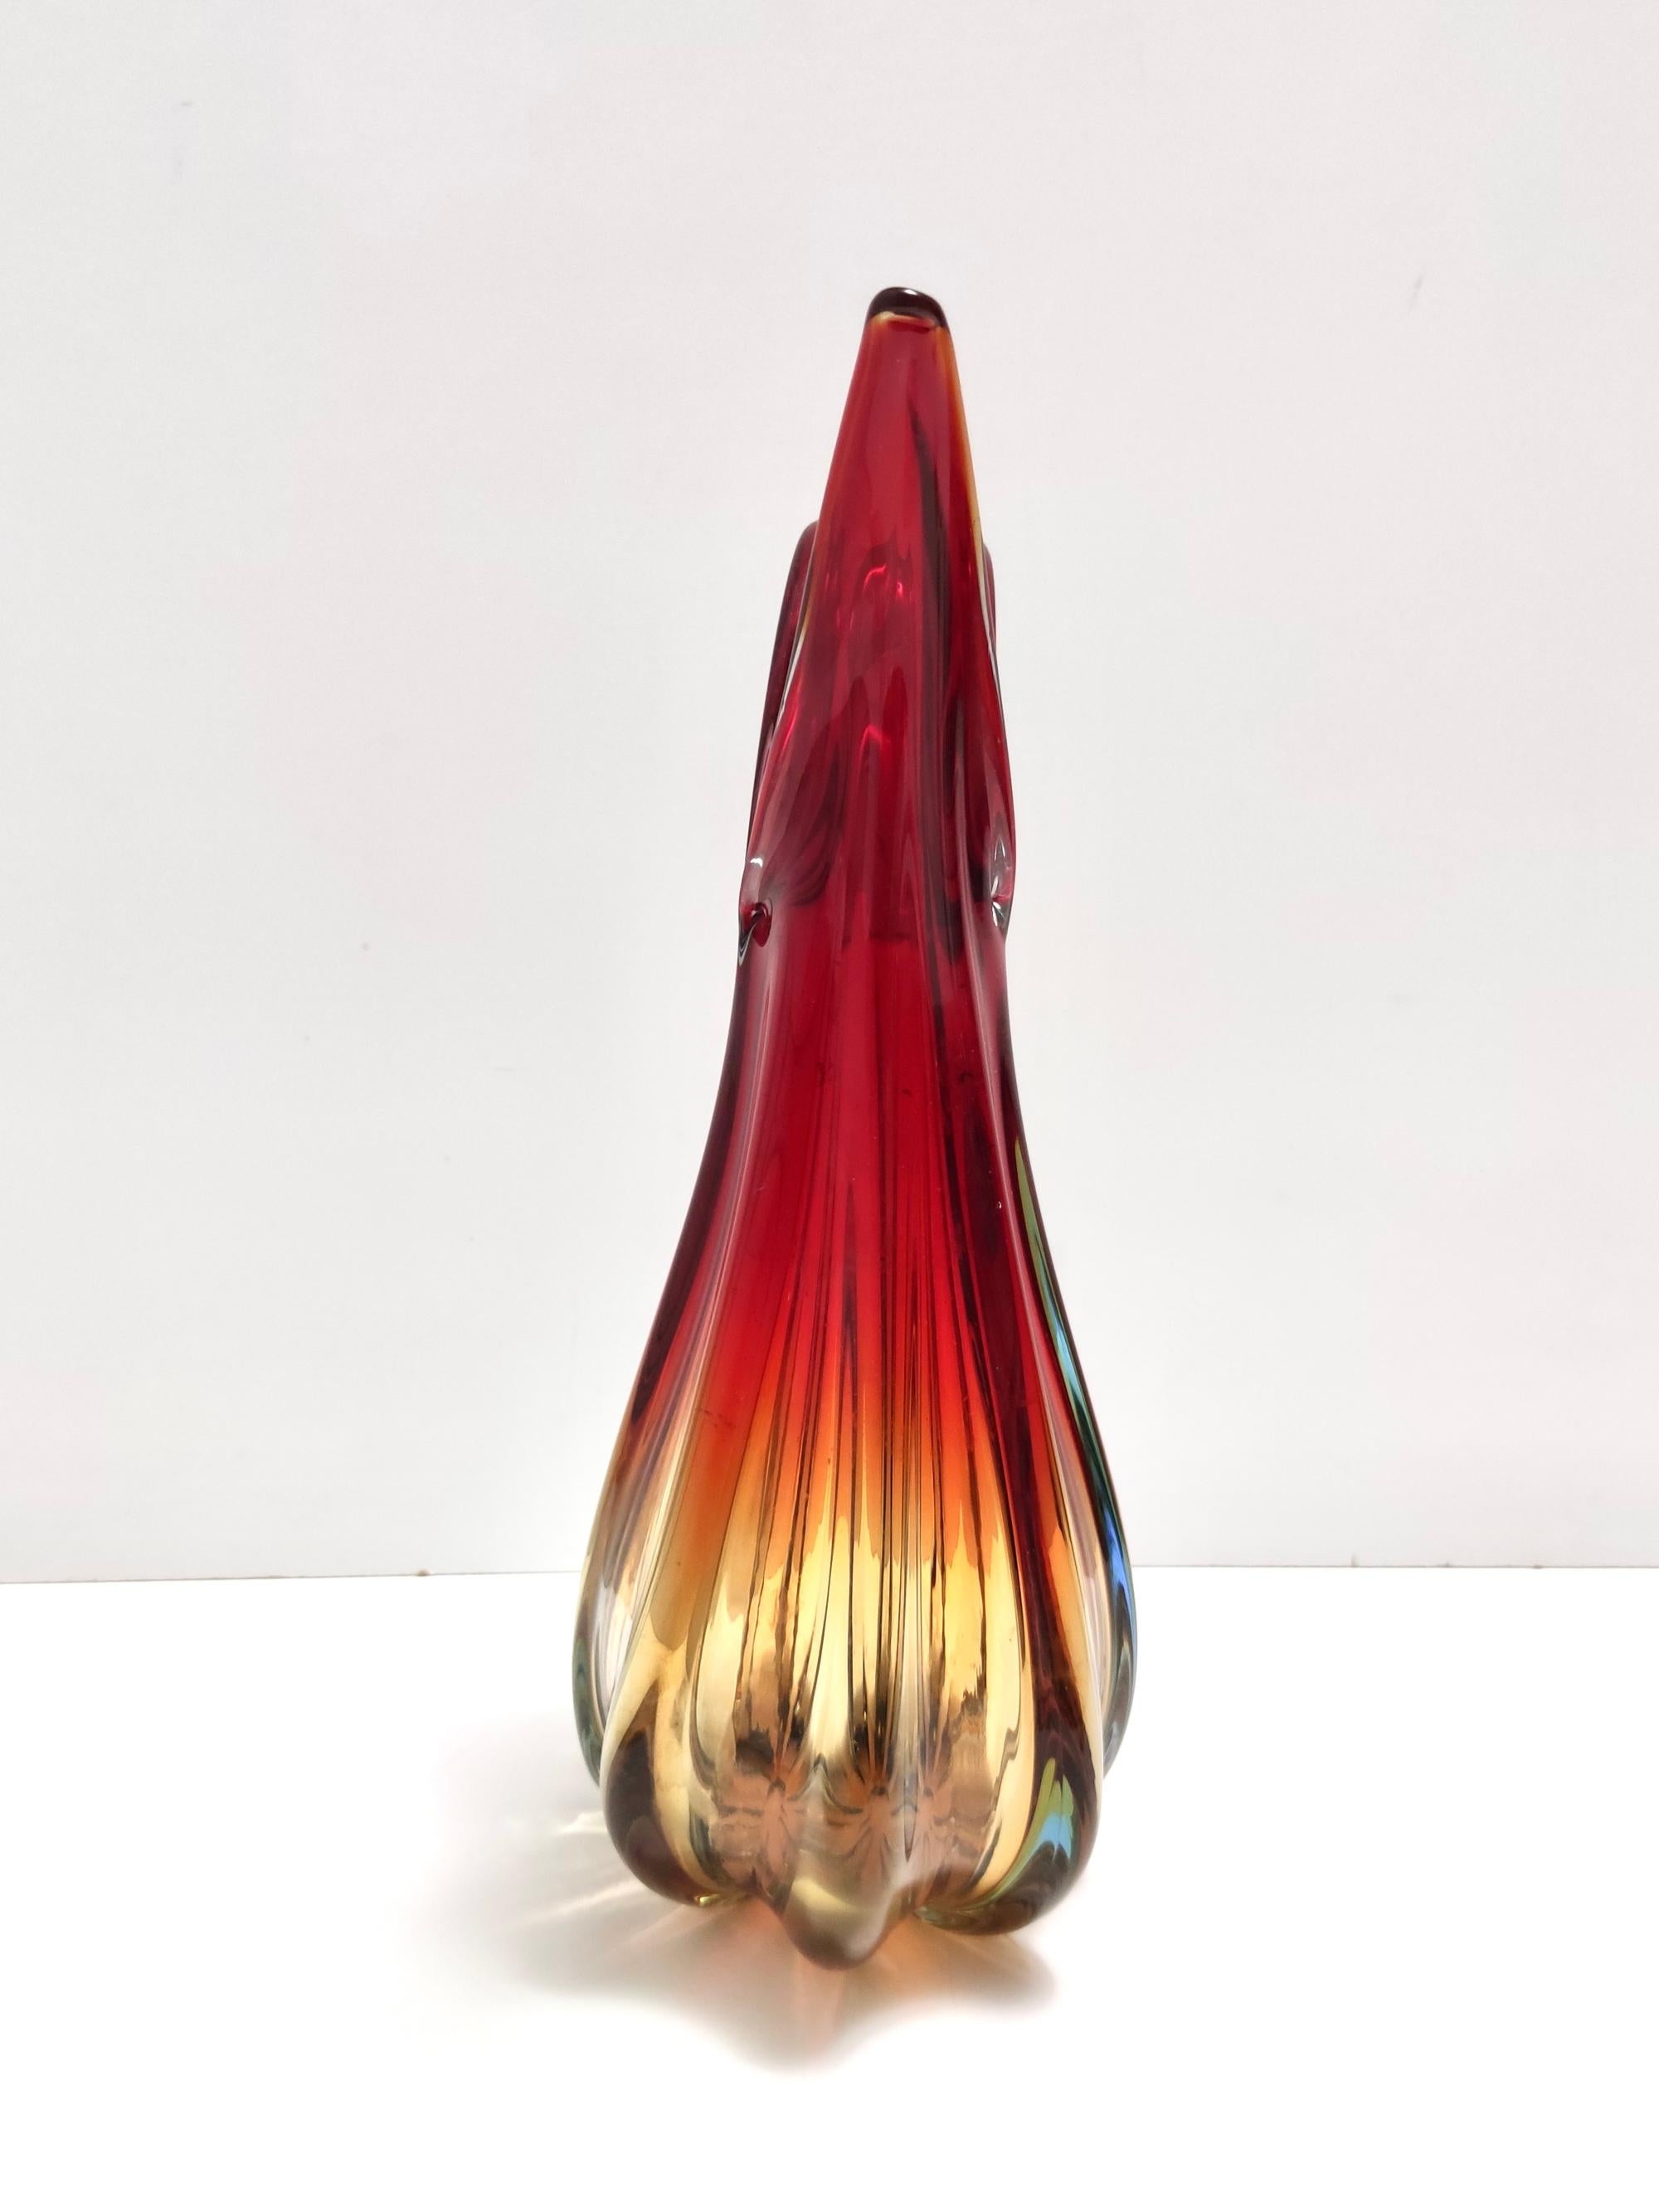 Stunning Vintage Red, Orange and Yellow Sommerso Murano Glass Vase, Italy For Sale 1